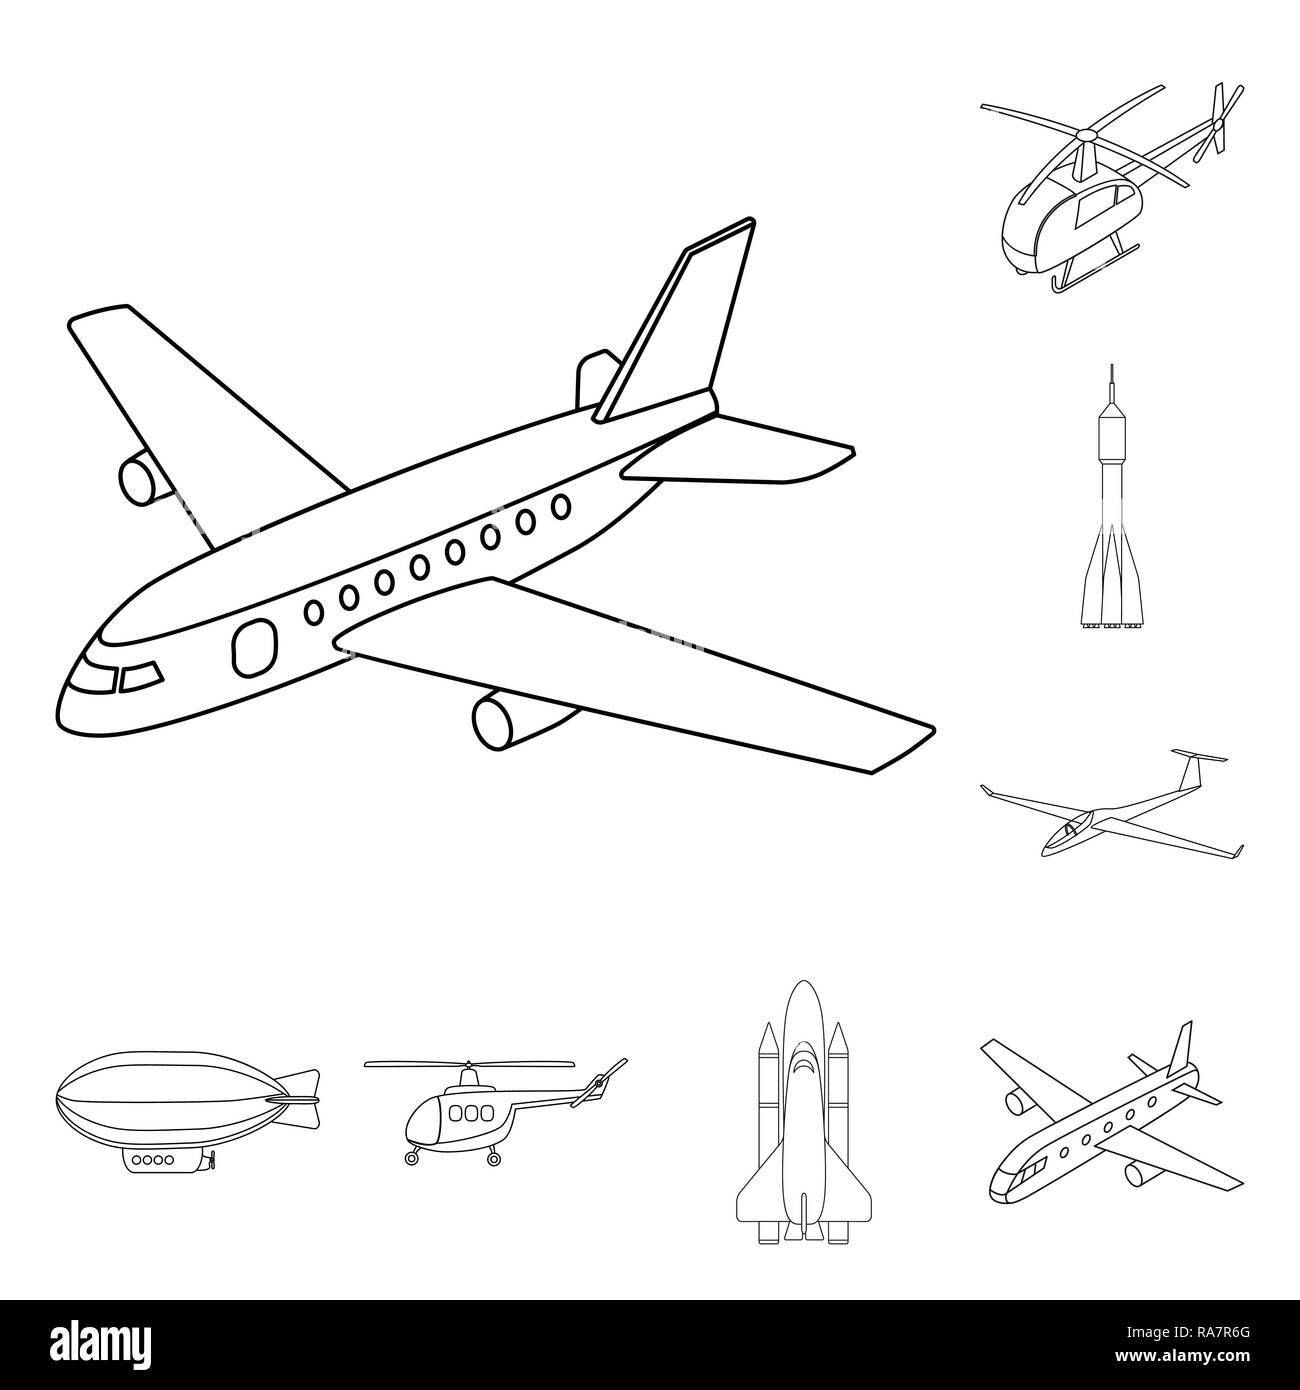 airplane,helicopter,rocket,aircraft,cloud,commercial,paper ...